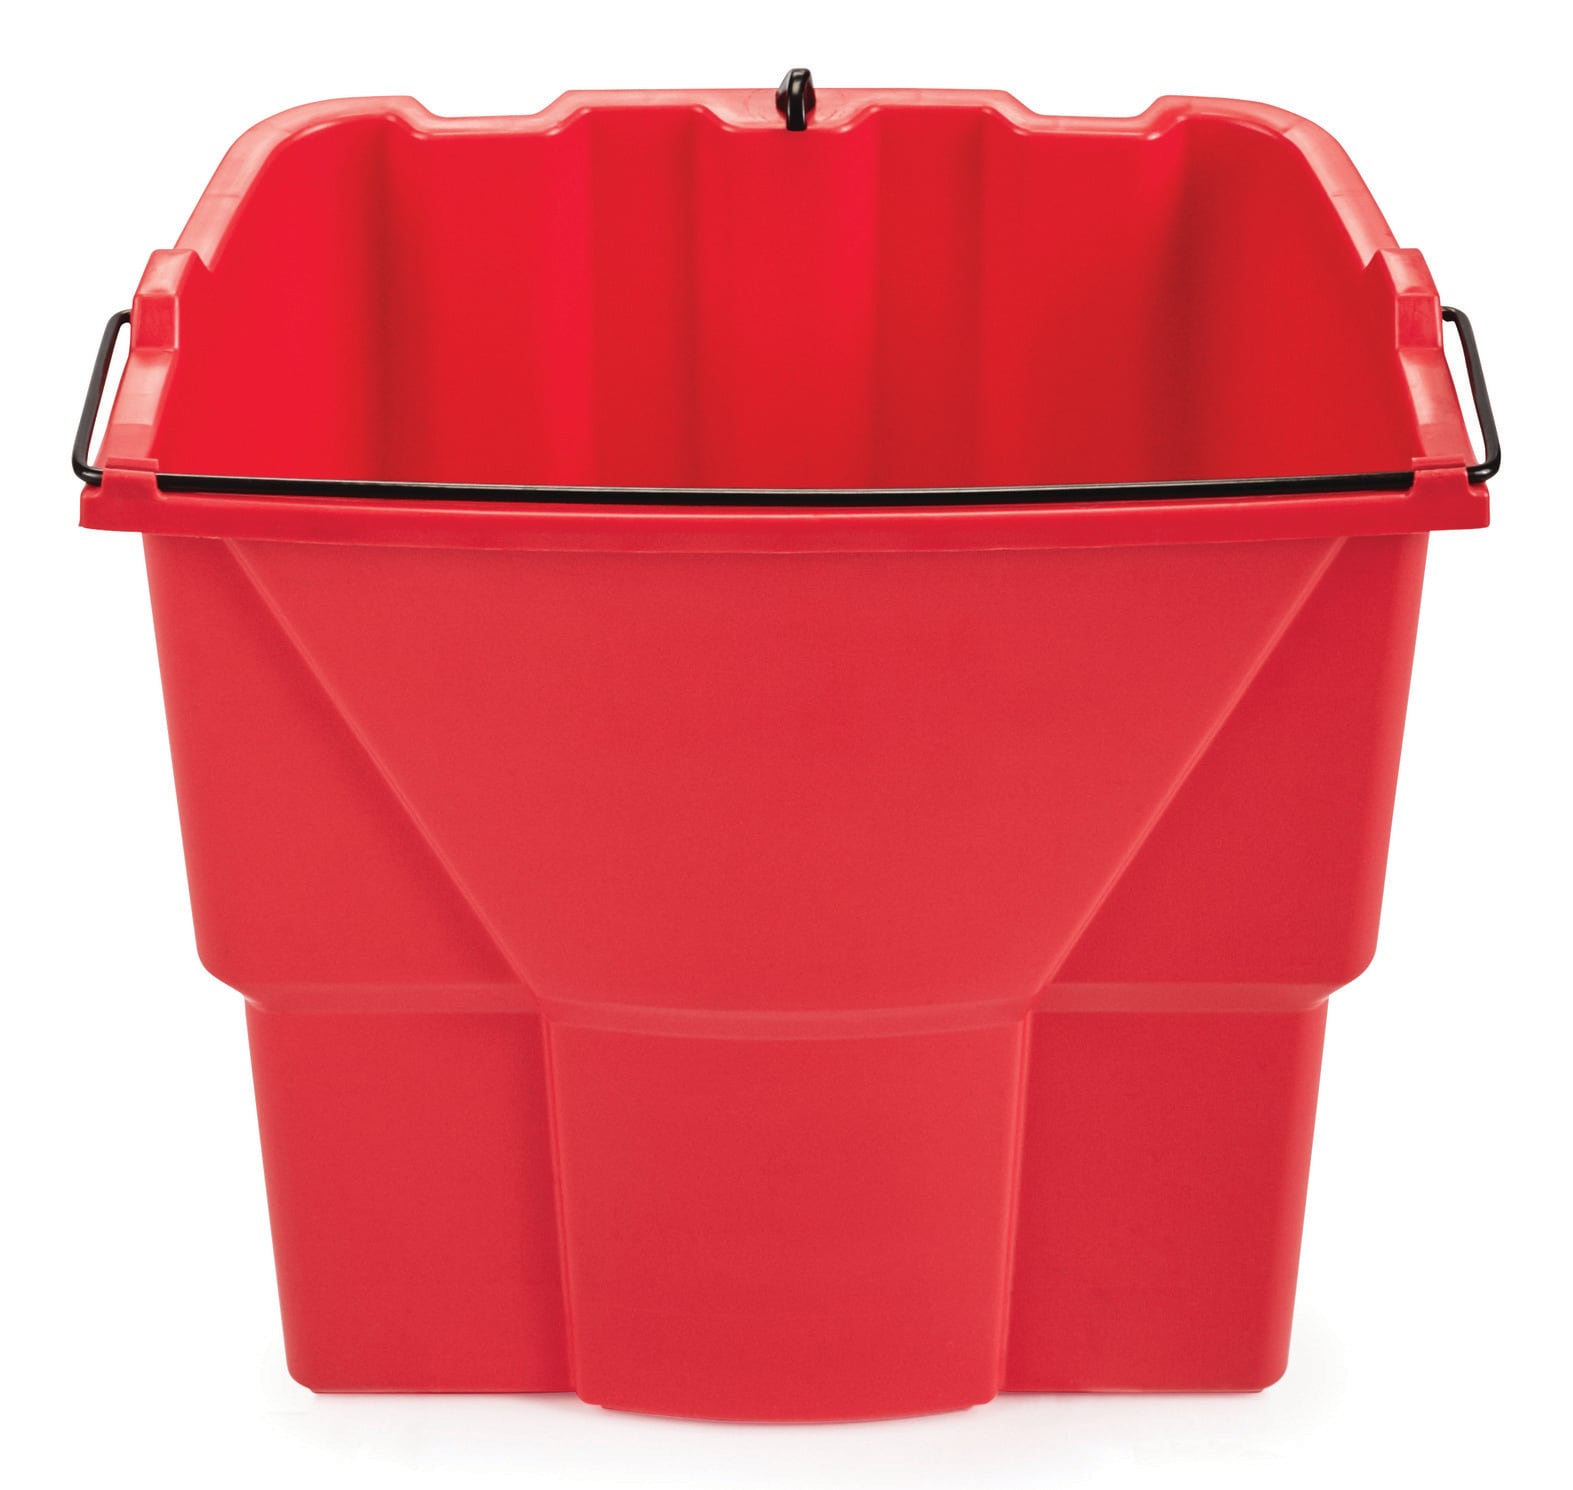 Rubbermaid Commercial Products WaveBrake 4.5 Gal. Red Plastic Dirty Water  Bucket 2064907 - The Home Depot